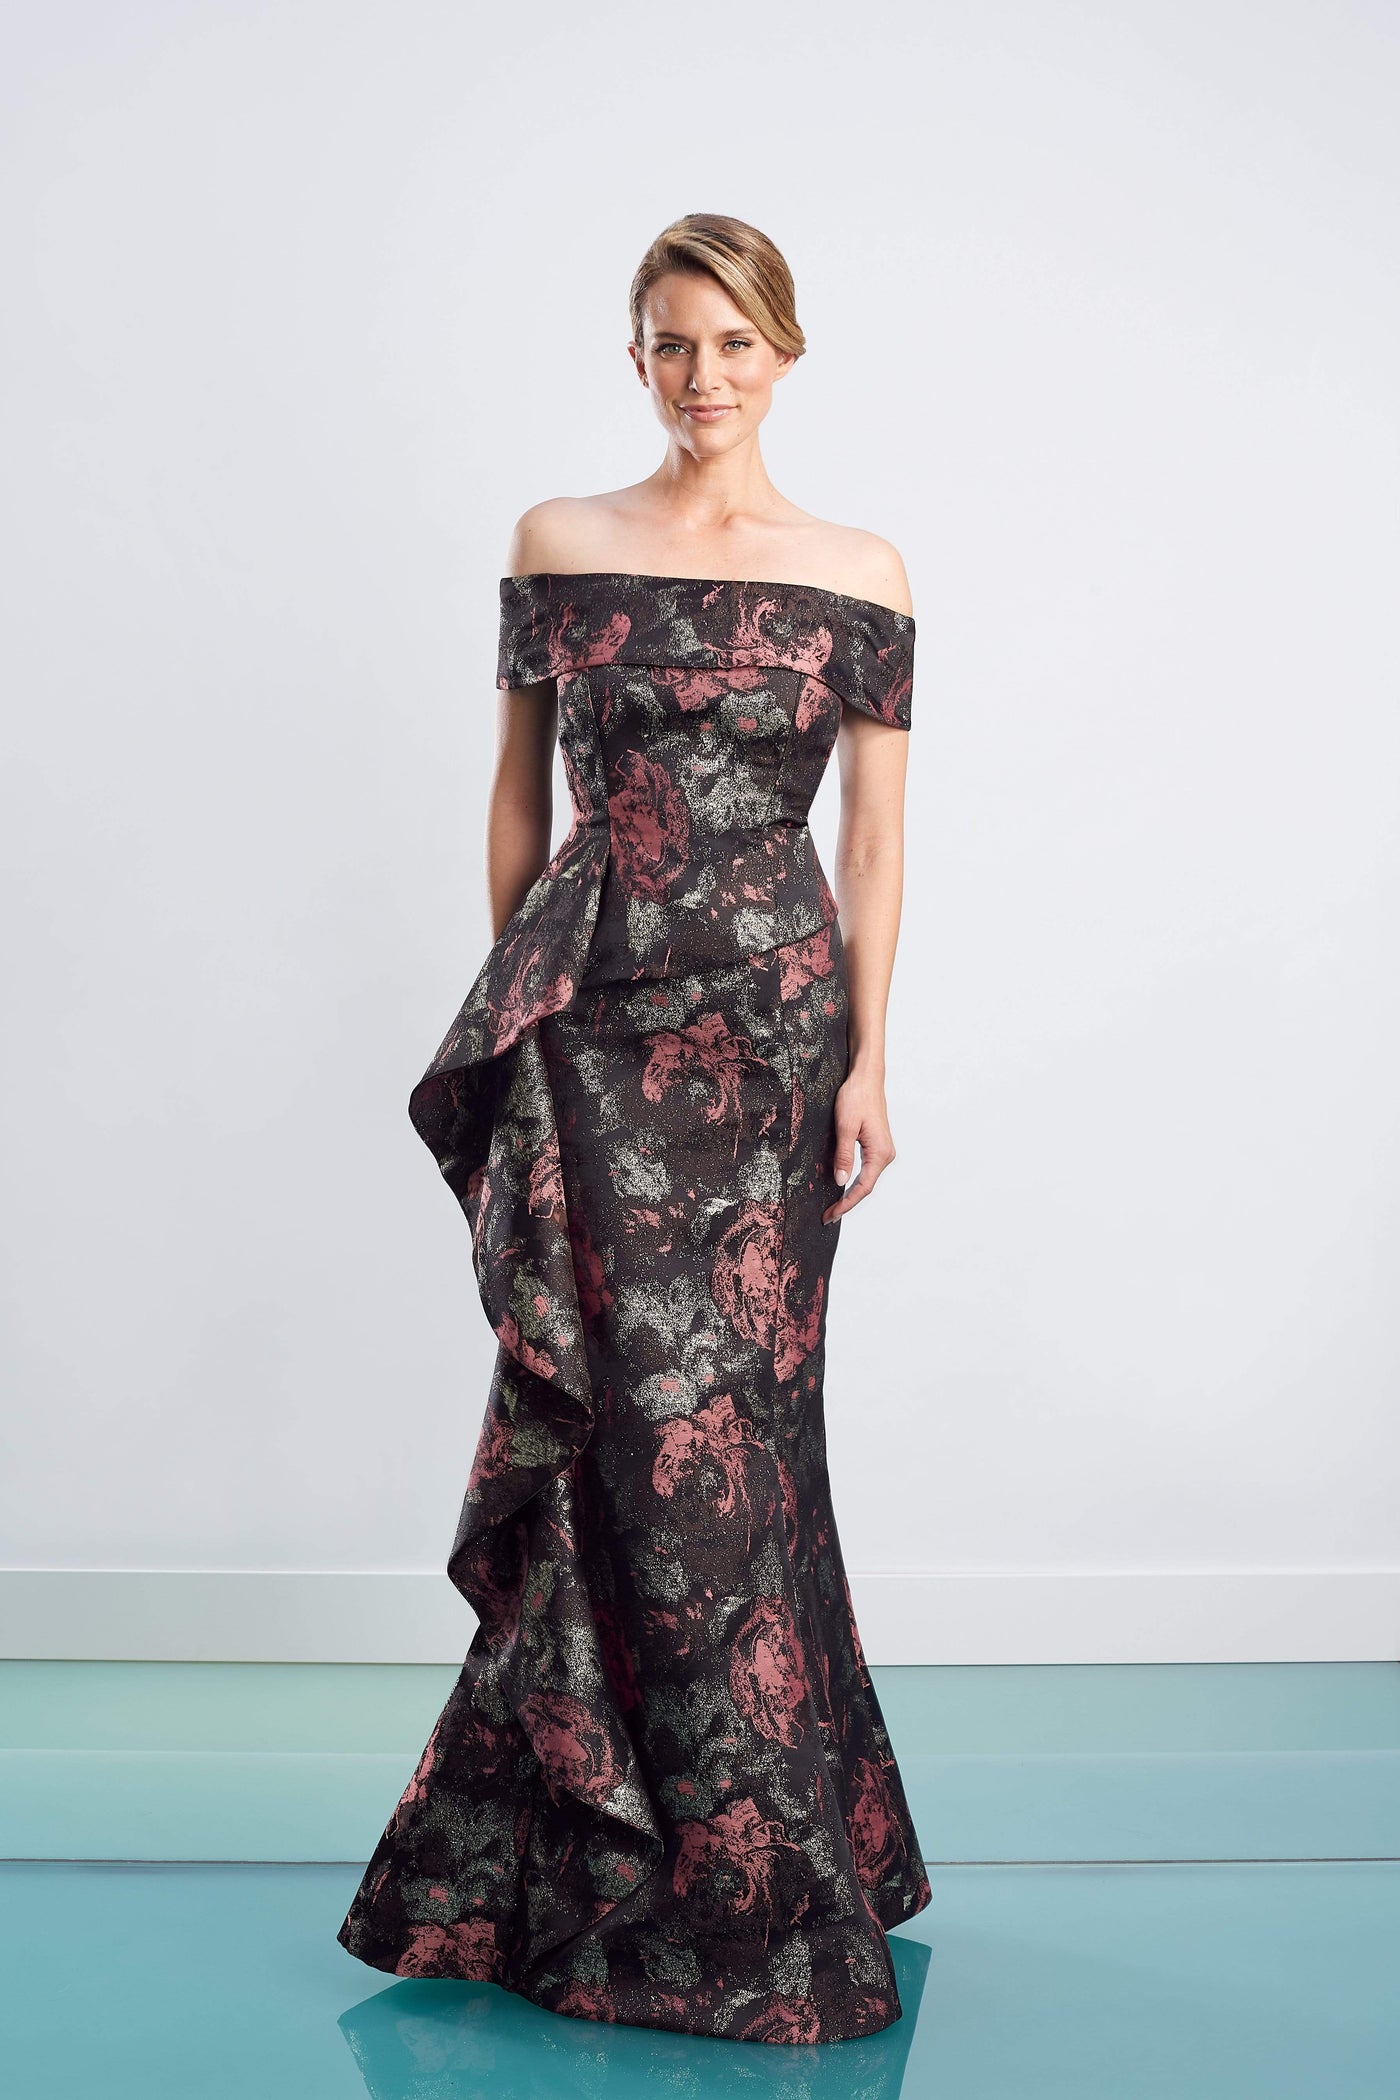 Alexander By Daymor - 1467 Off Shoulder Glittered Floral Gown Special Occasion Dress